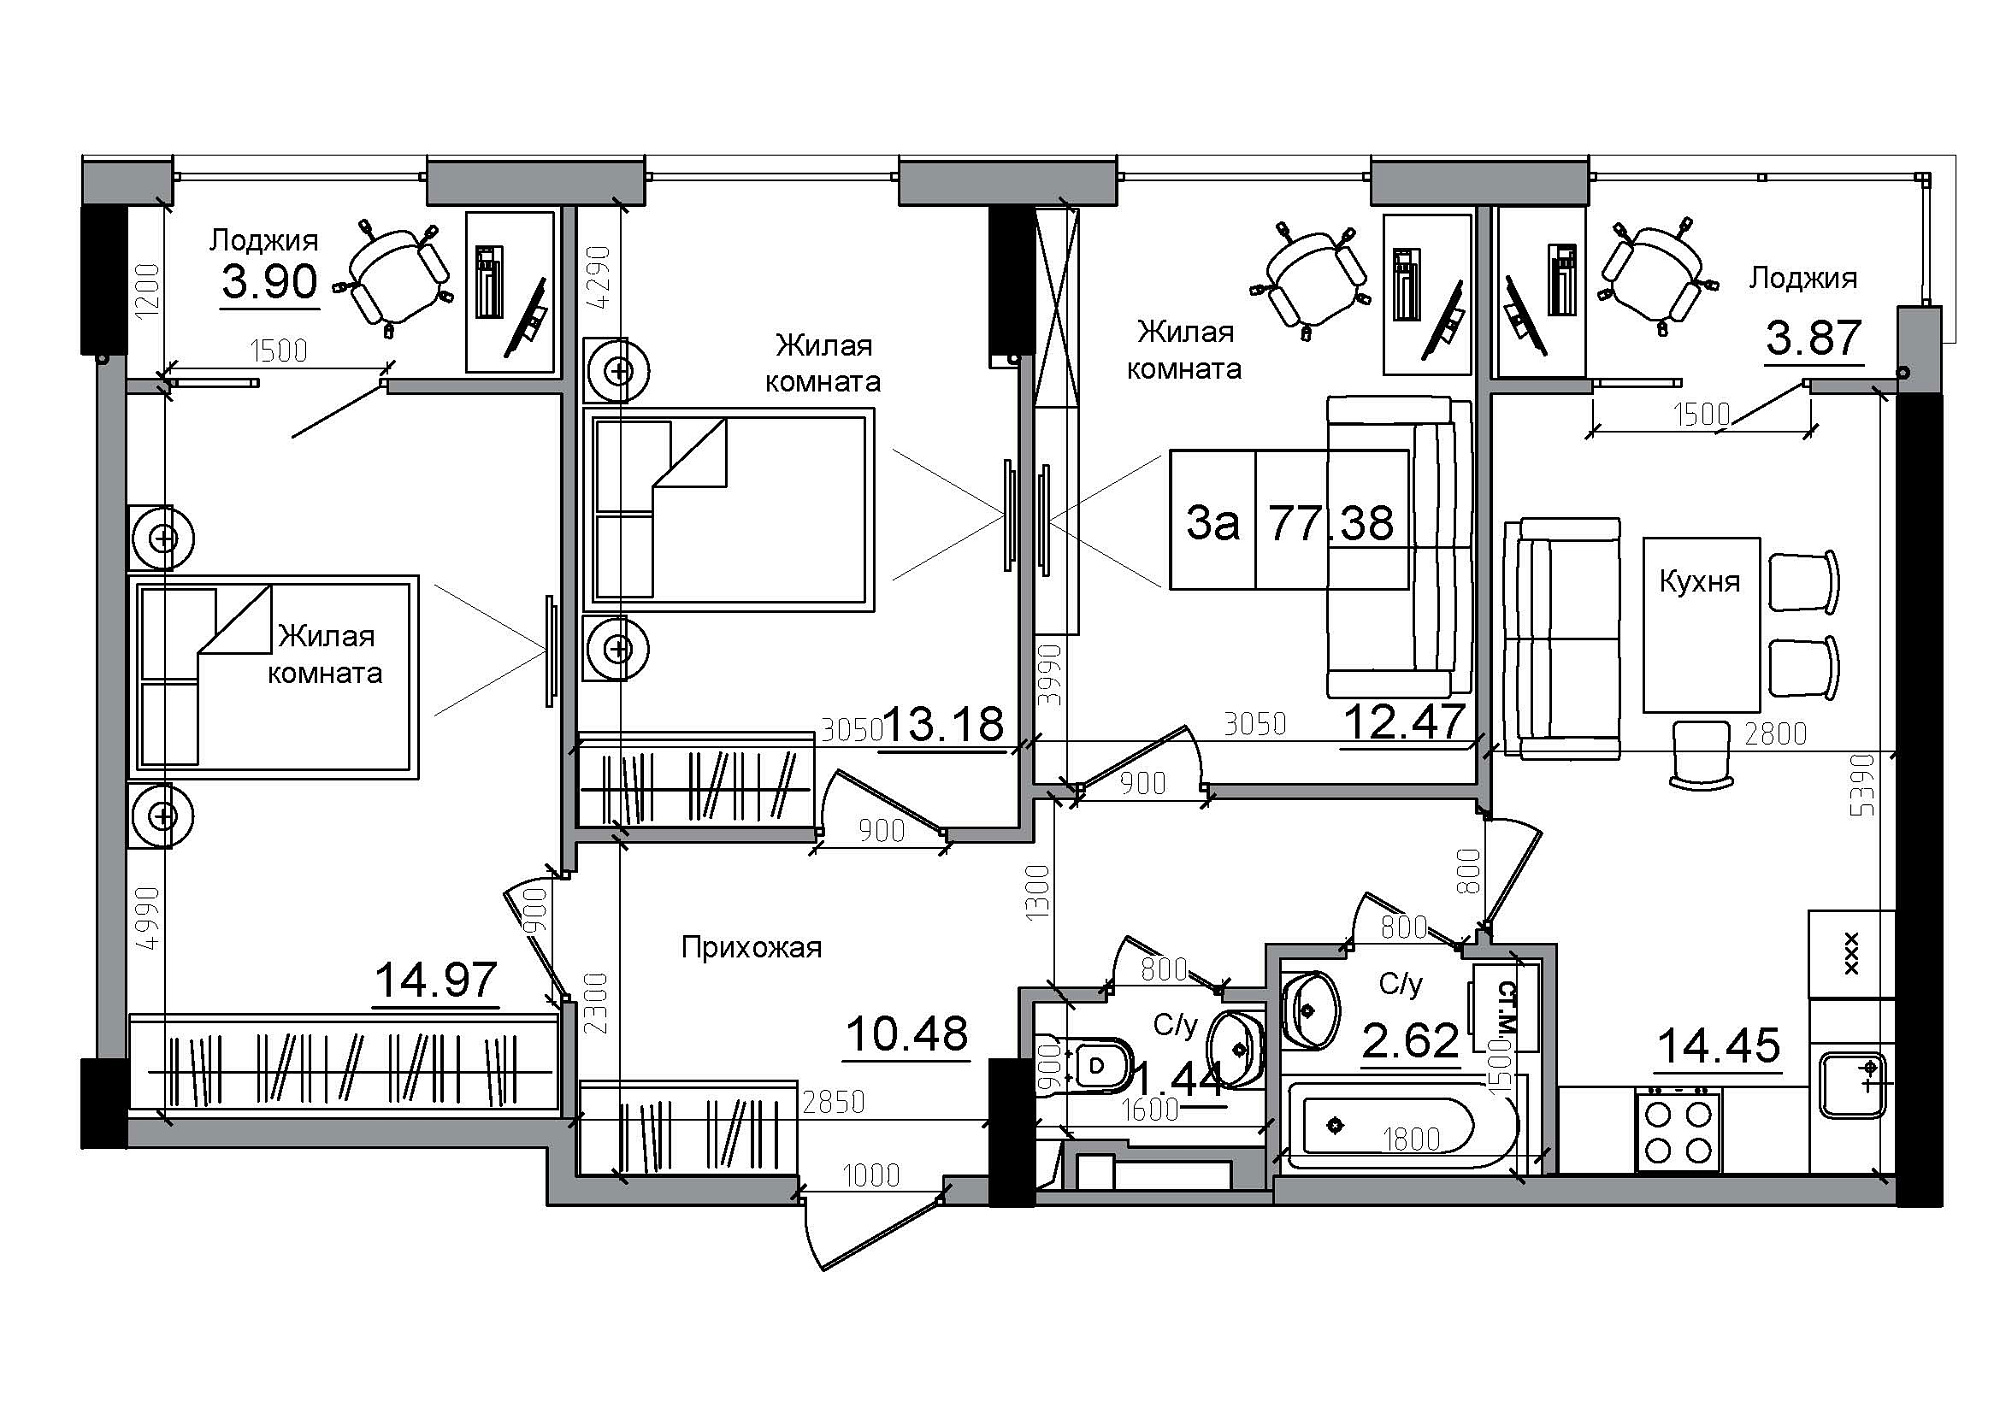 Planning 3-rm flats area 77.38m2, AB-12-11/00010.